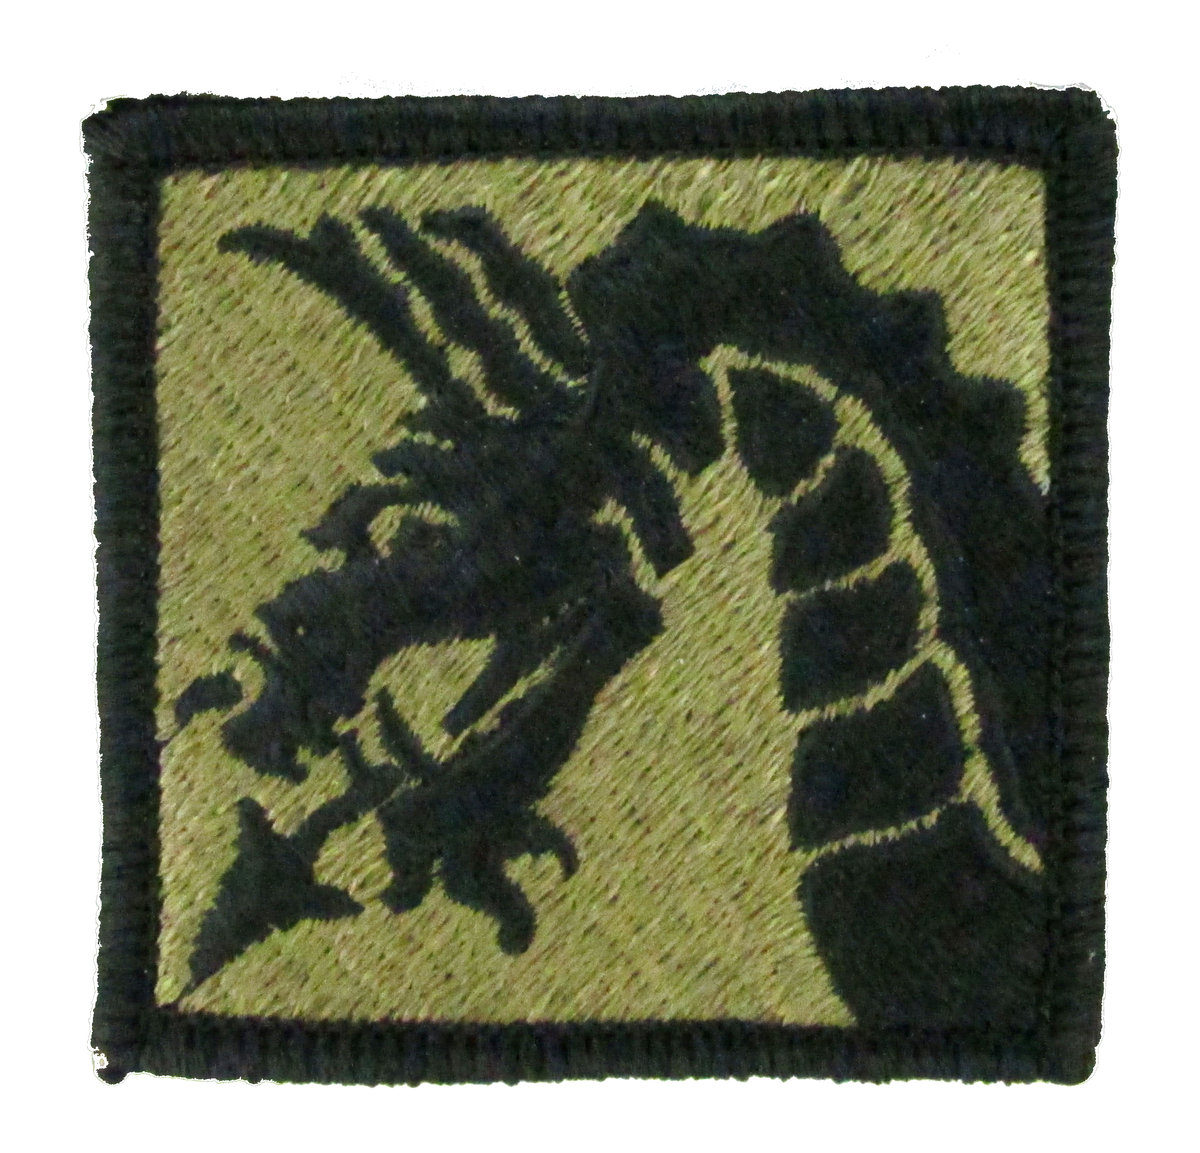 18th Airborne Corps OCP Patch